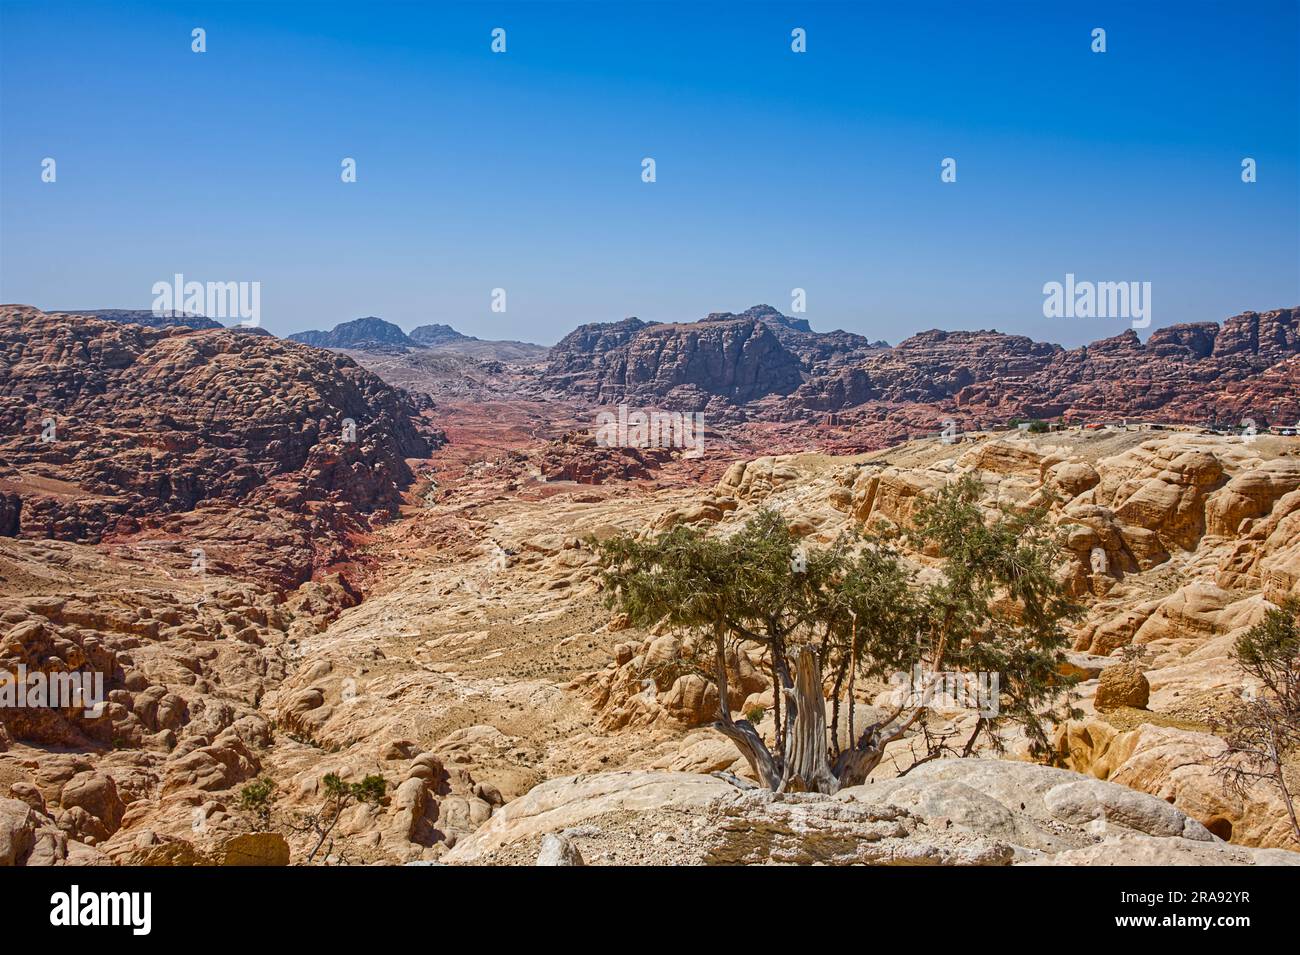 Scenic of dry mountains and only one tree under the hot sun in Middle East Stock Photo